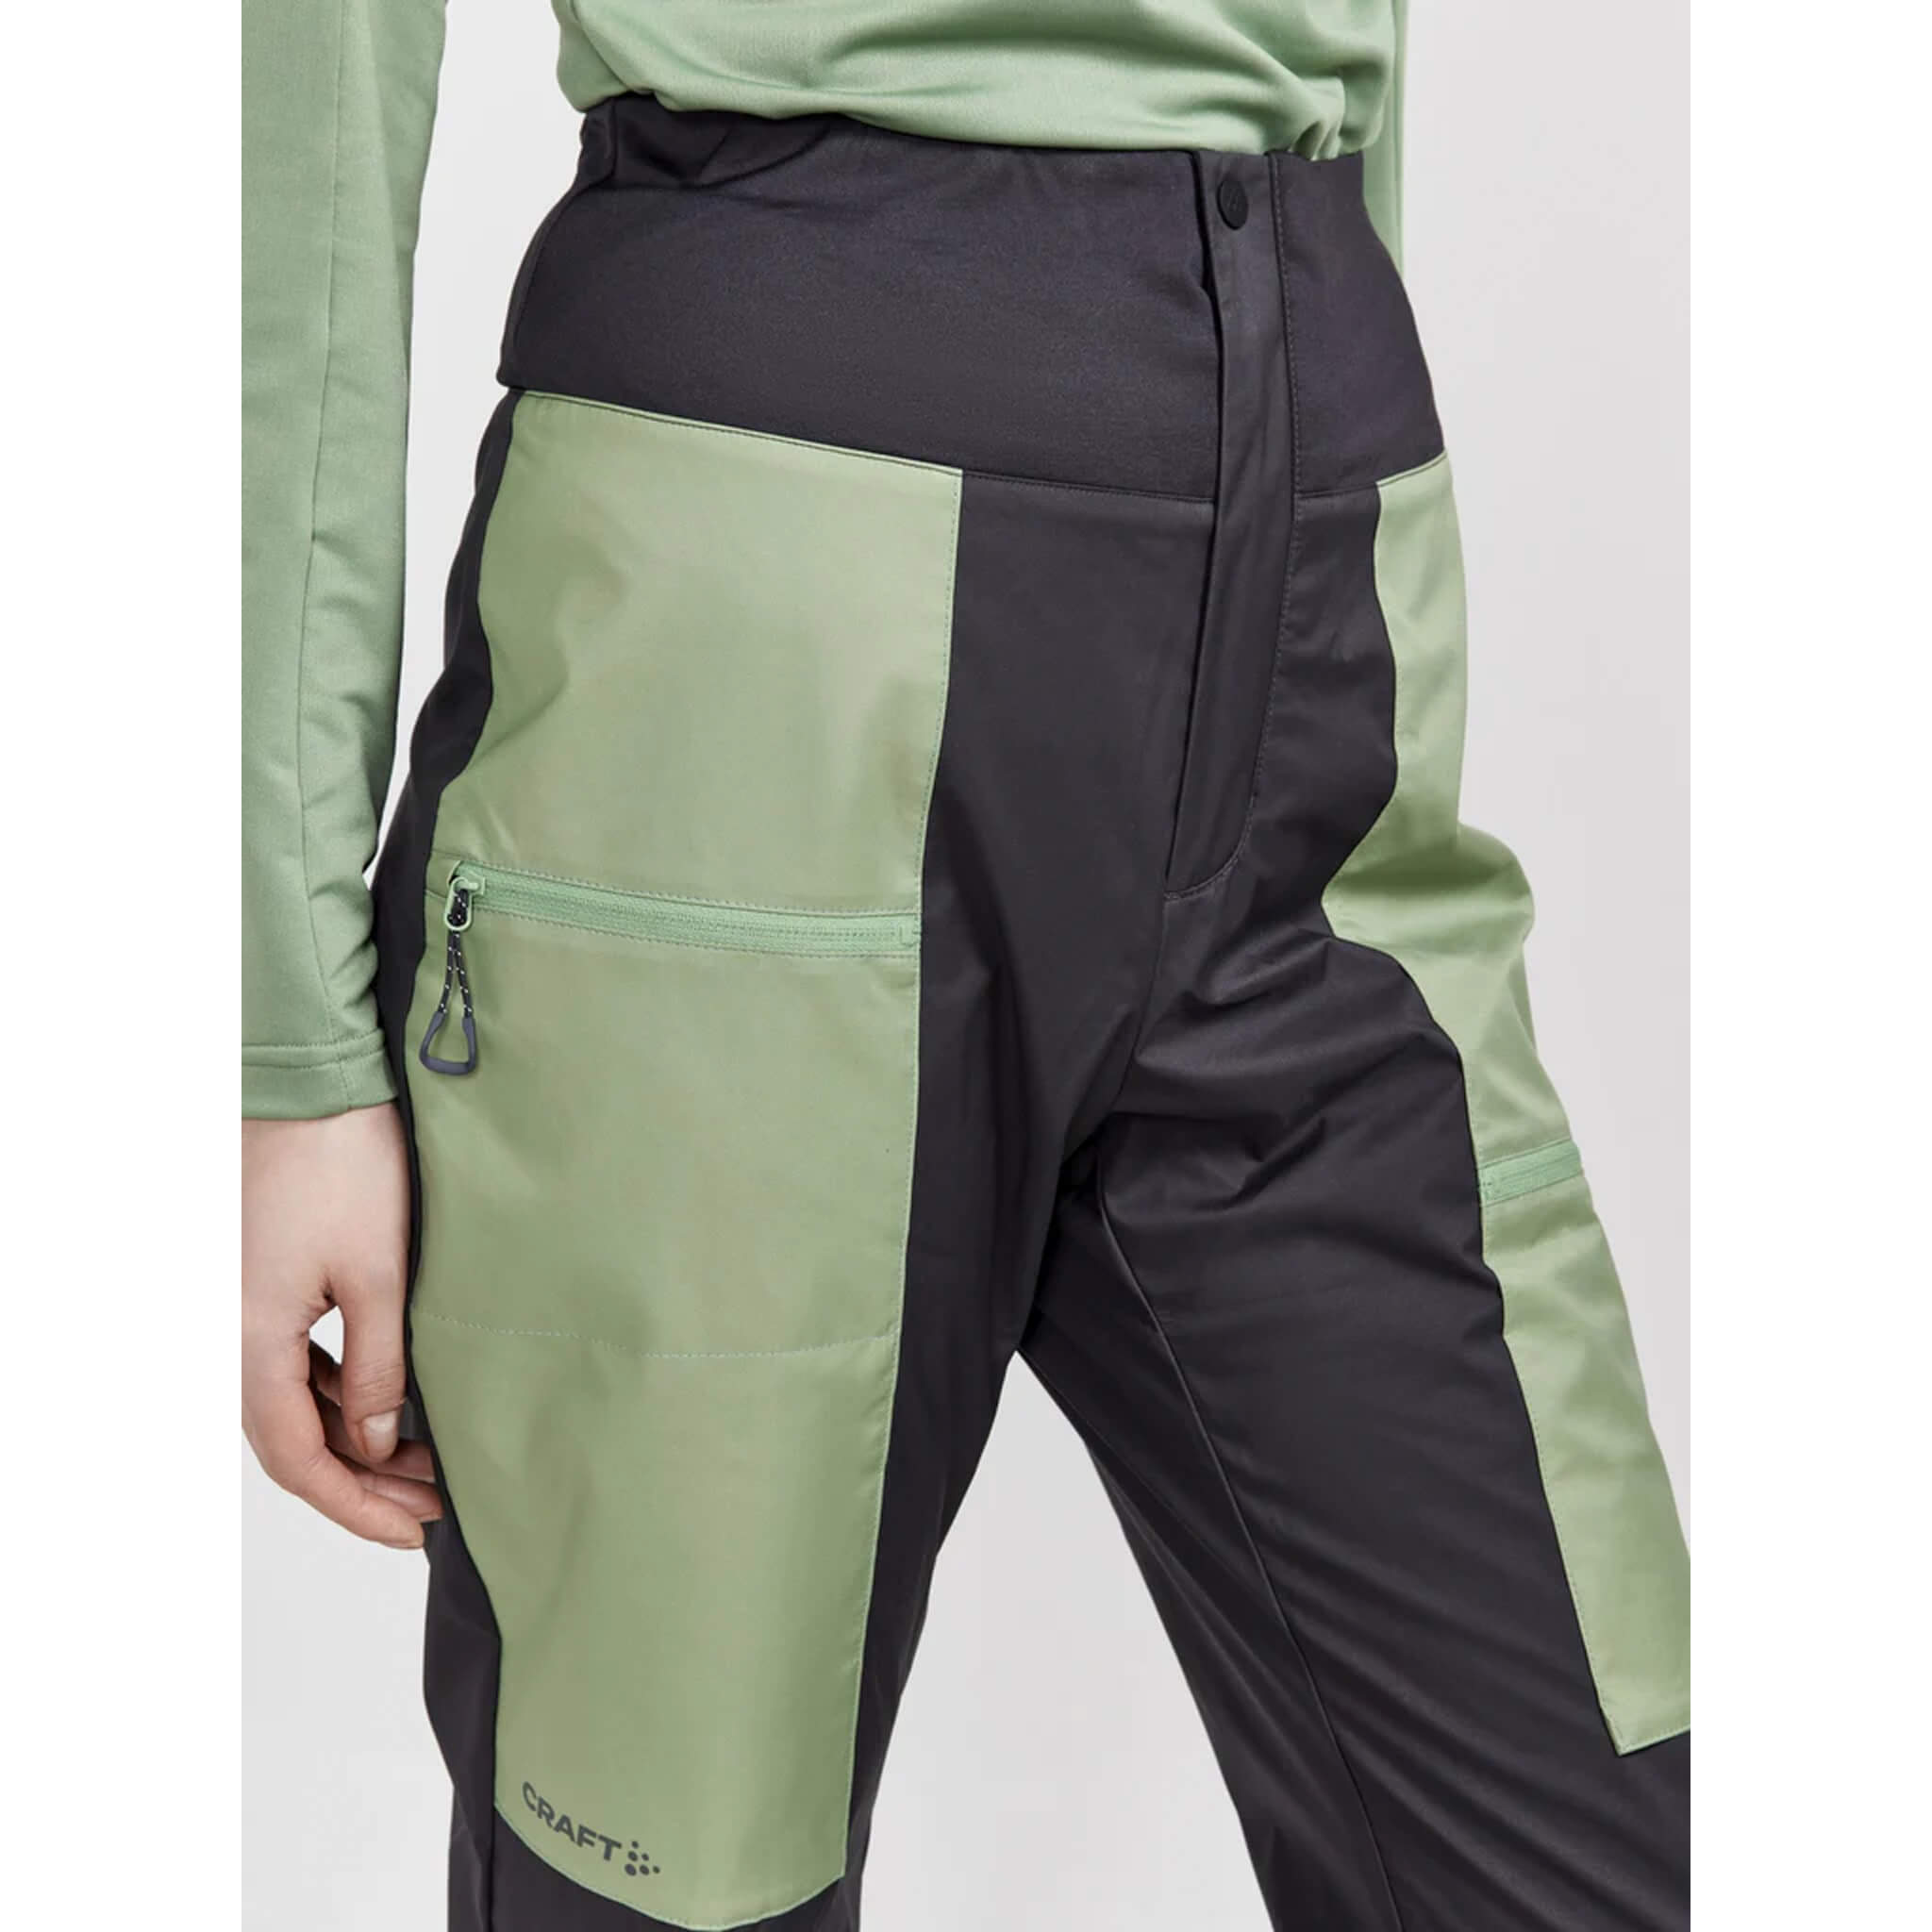 Craft Adv Backcountry Pant W-6